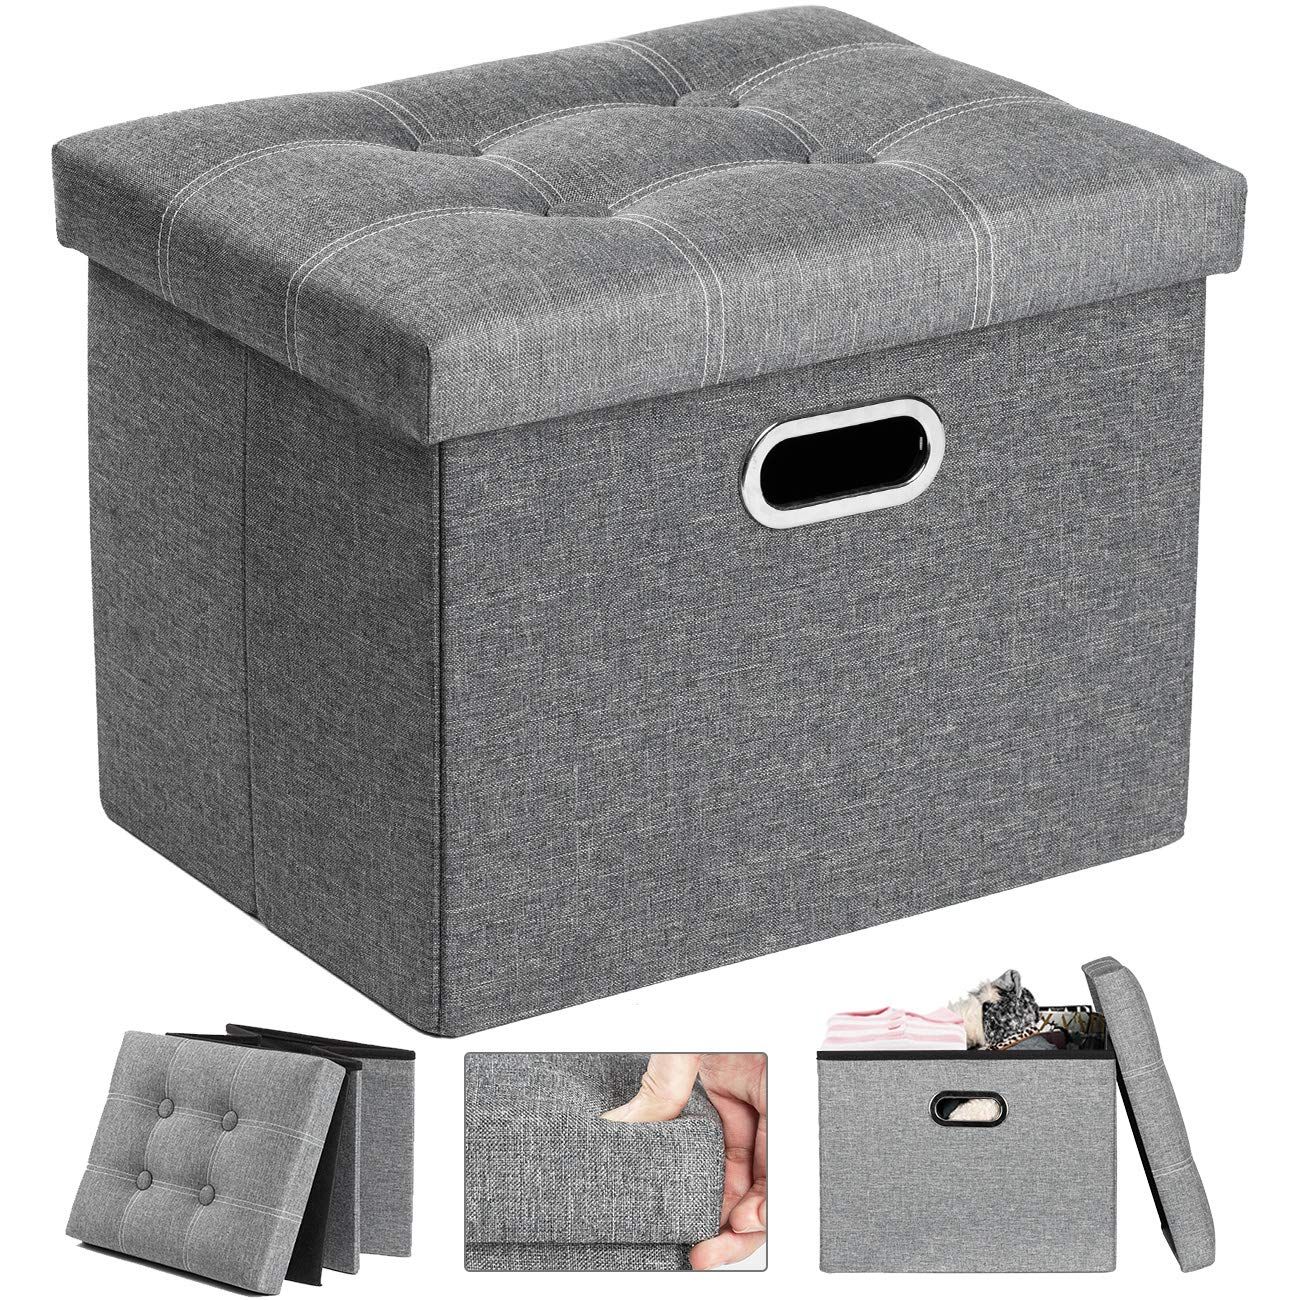 Cosyland Ottoman With Storage For Room Folding Ottoman Foot Stool Intended For Light Gray Fold Out Sleeper Ottomans (View 19 of 20)